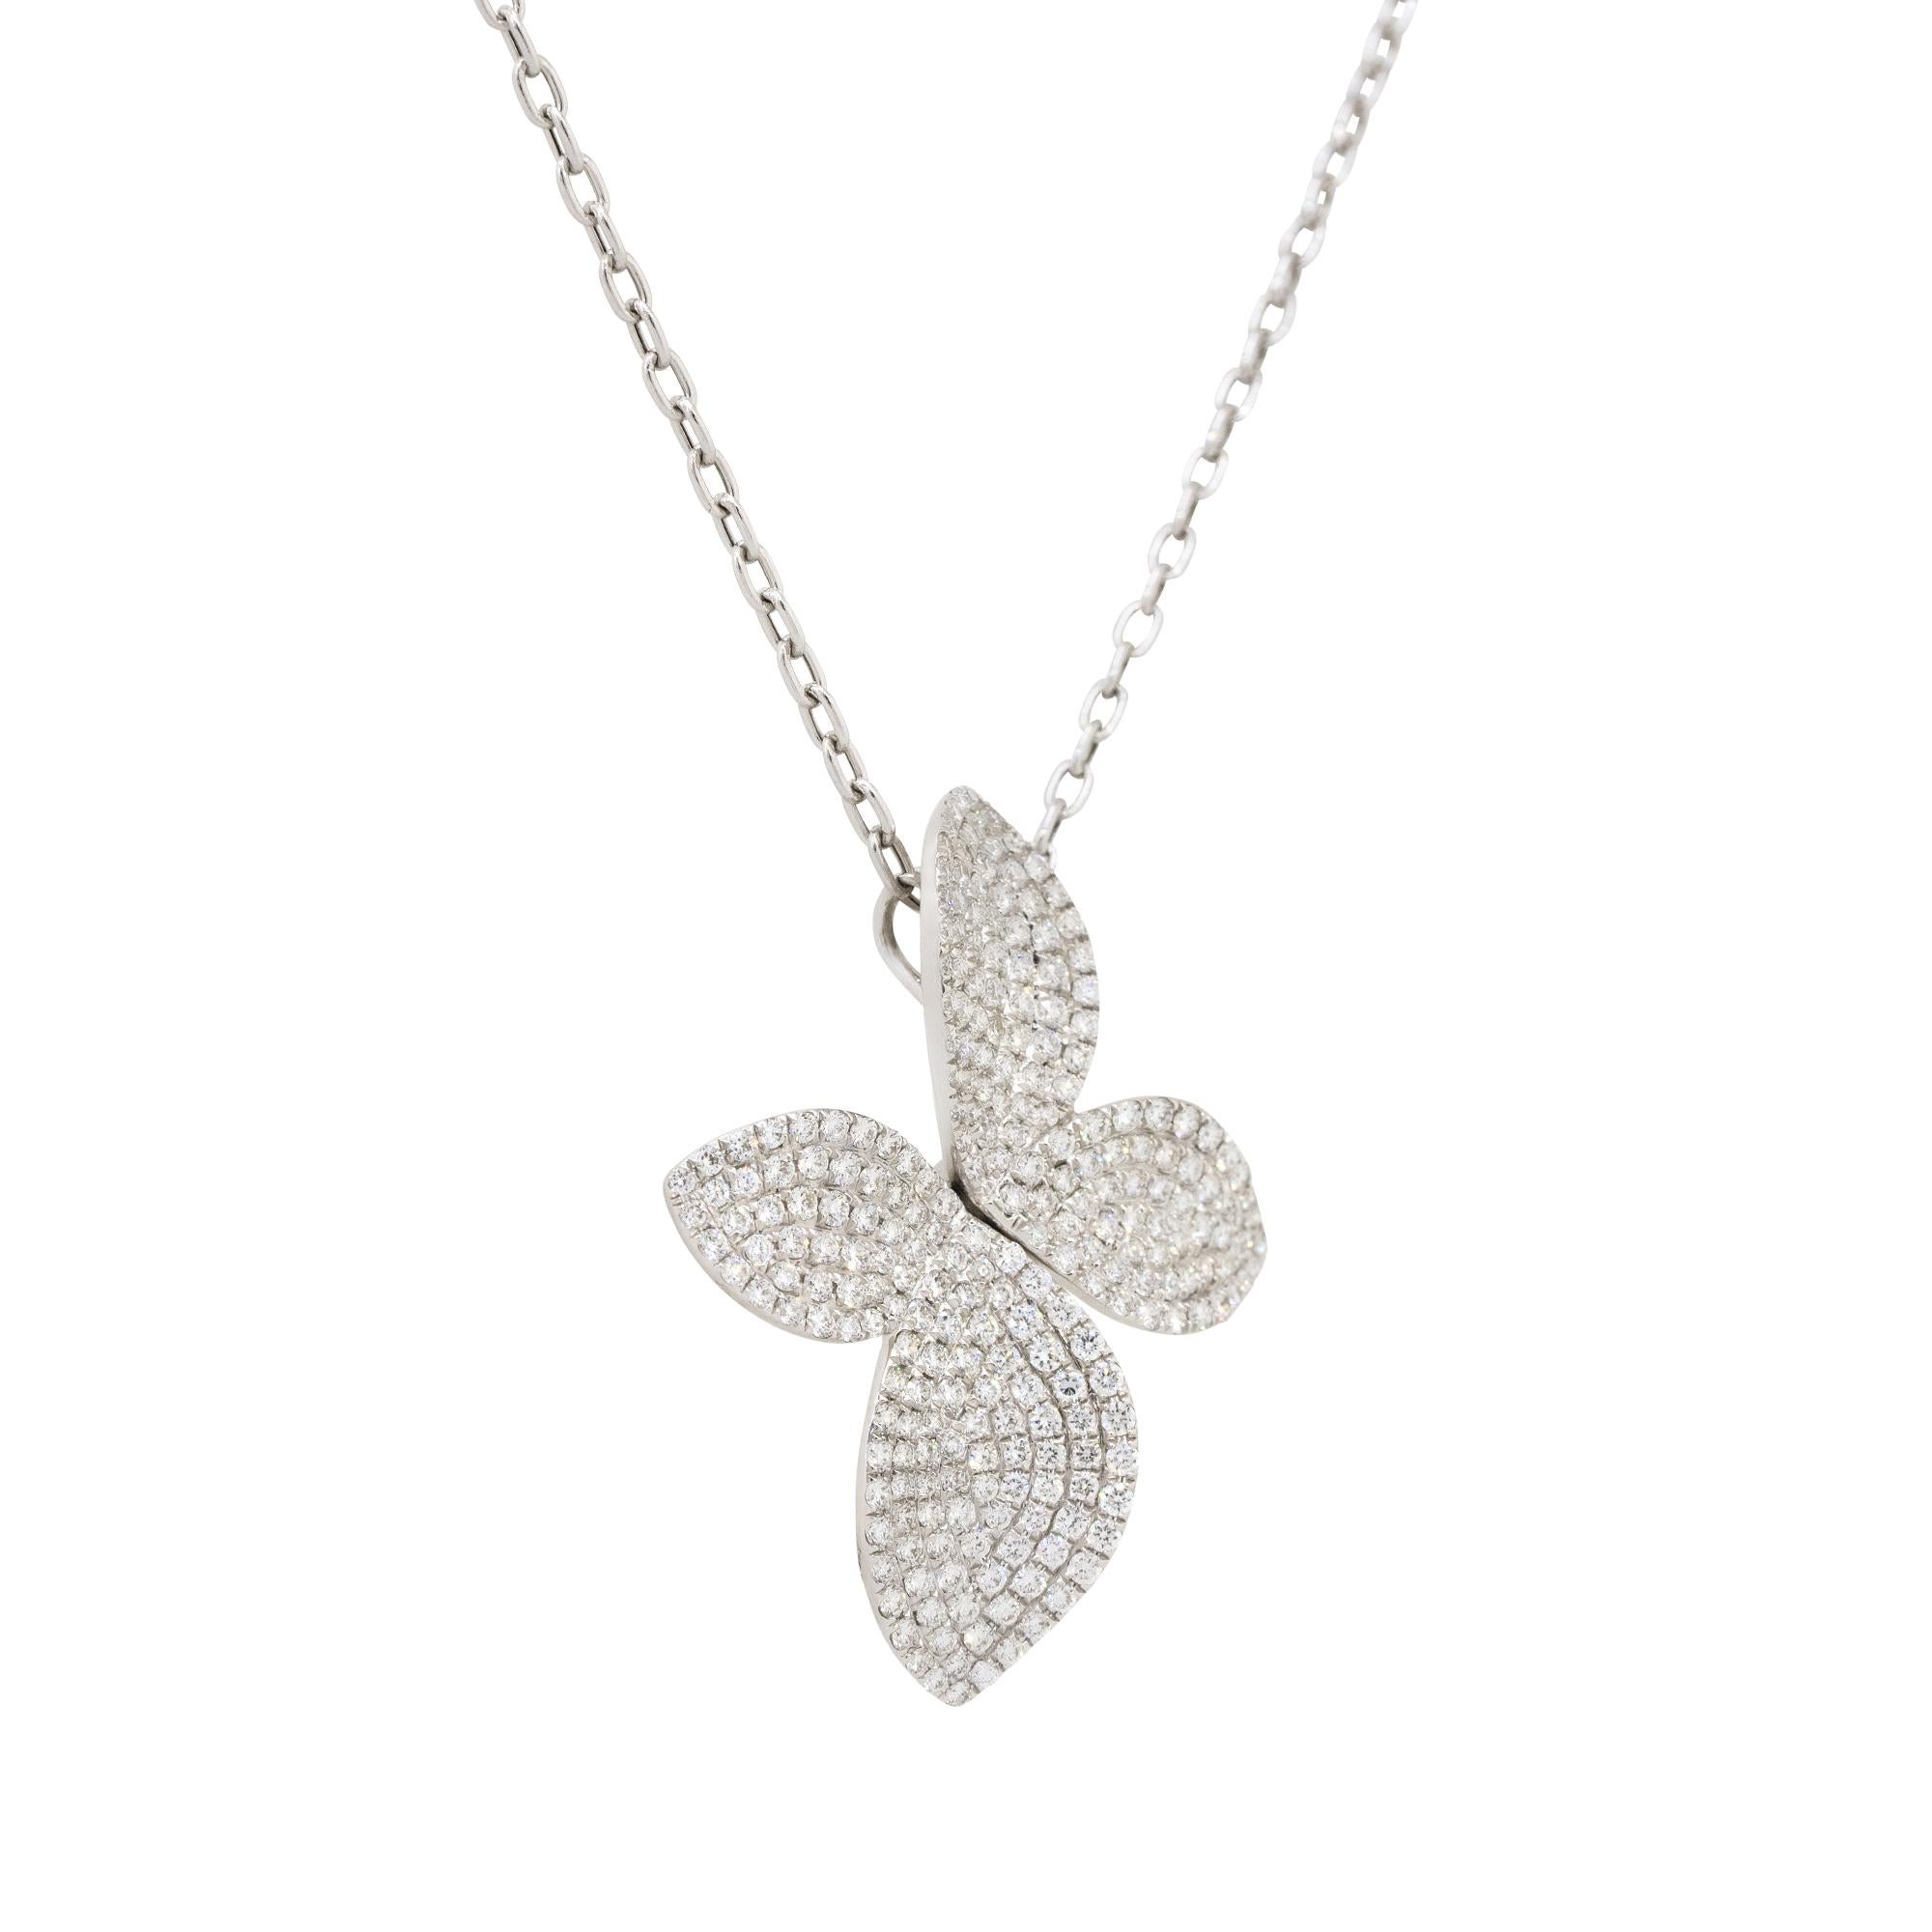 1.44 Carat Diamond Pave Flower Pendant Necklace 18 Karat in Stock In Excellent Condition For Sale In Boca Raton, FL